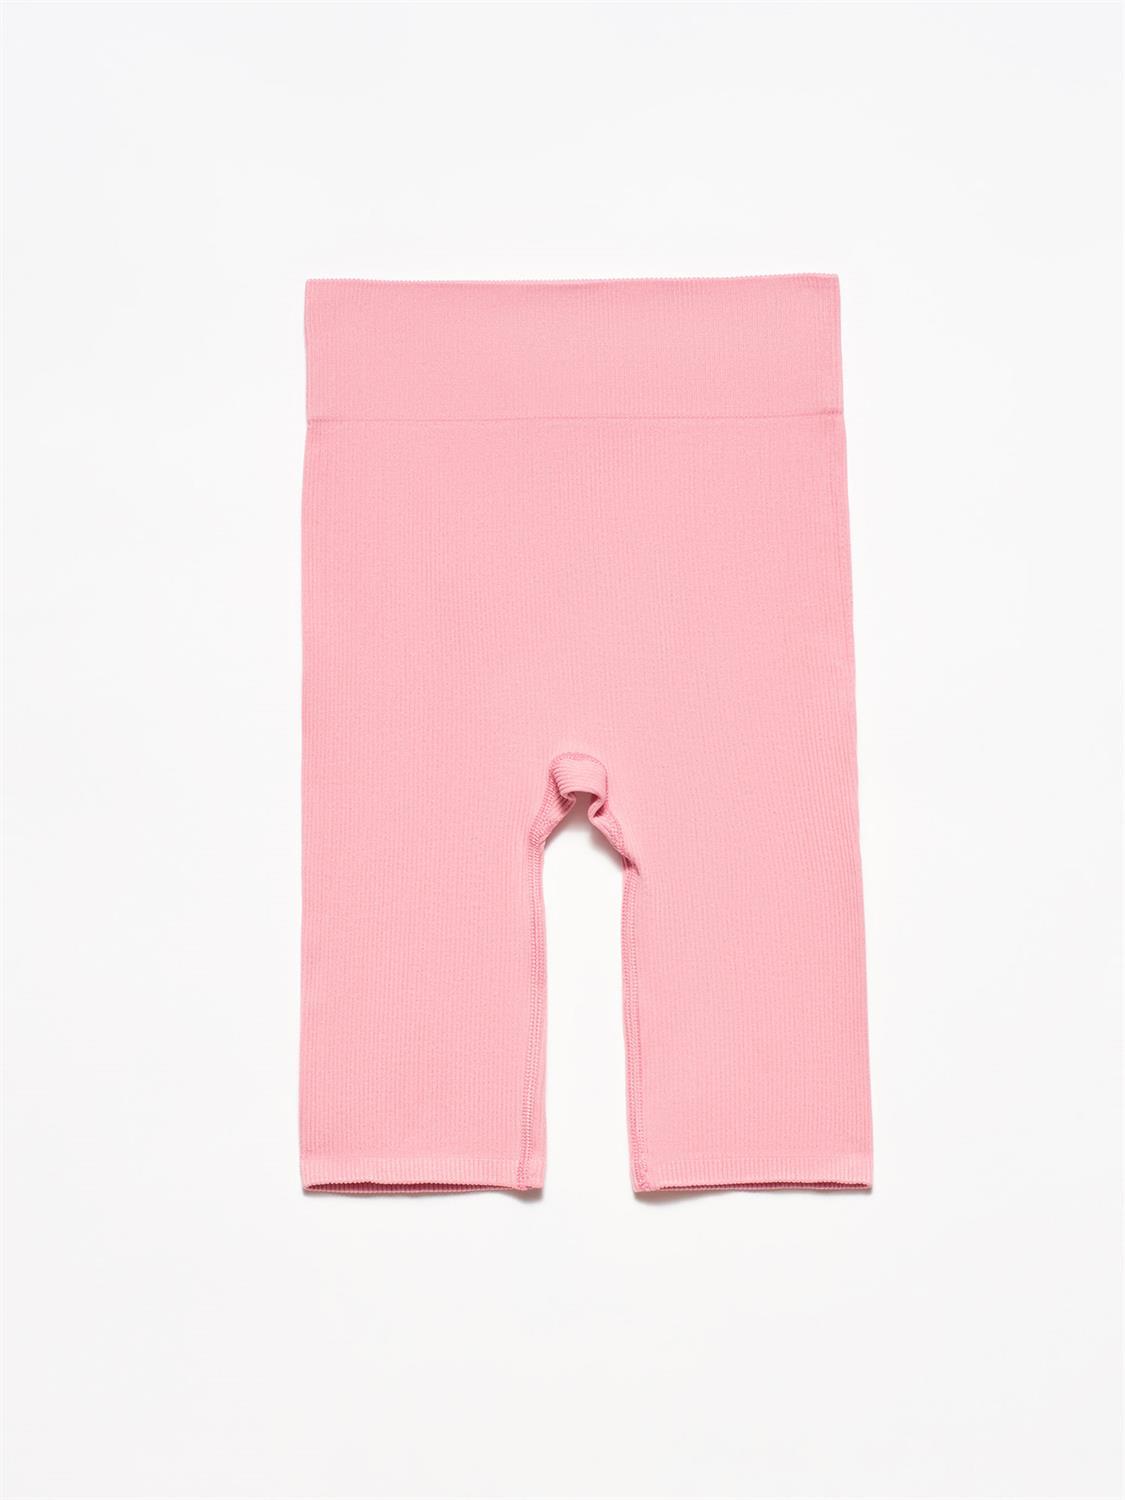 A wholesale clothing model wears Shorts - Pink, Turkish wholesale Shorts of Dilvin